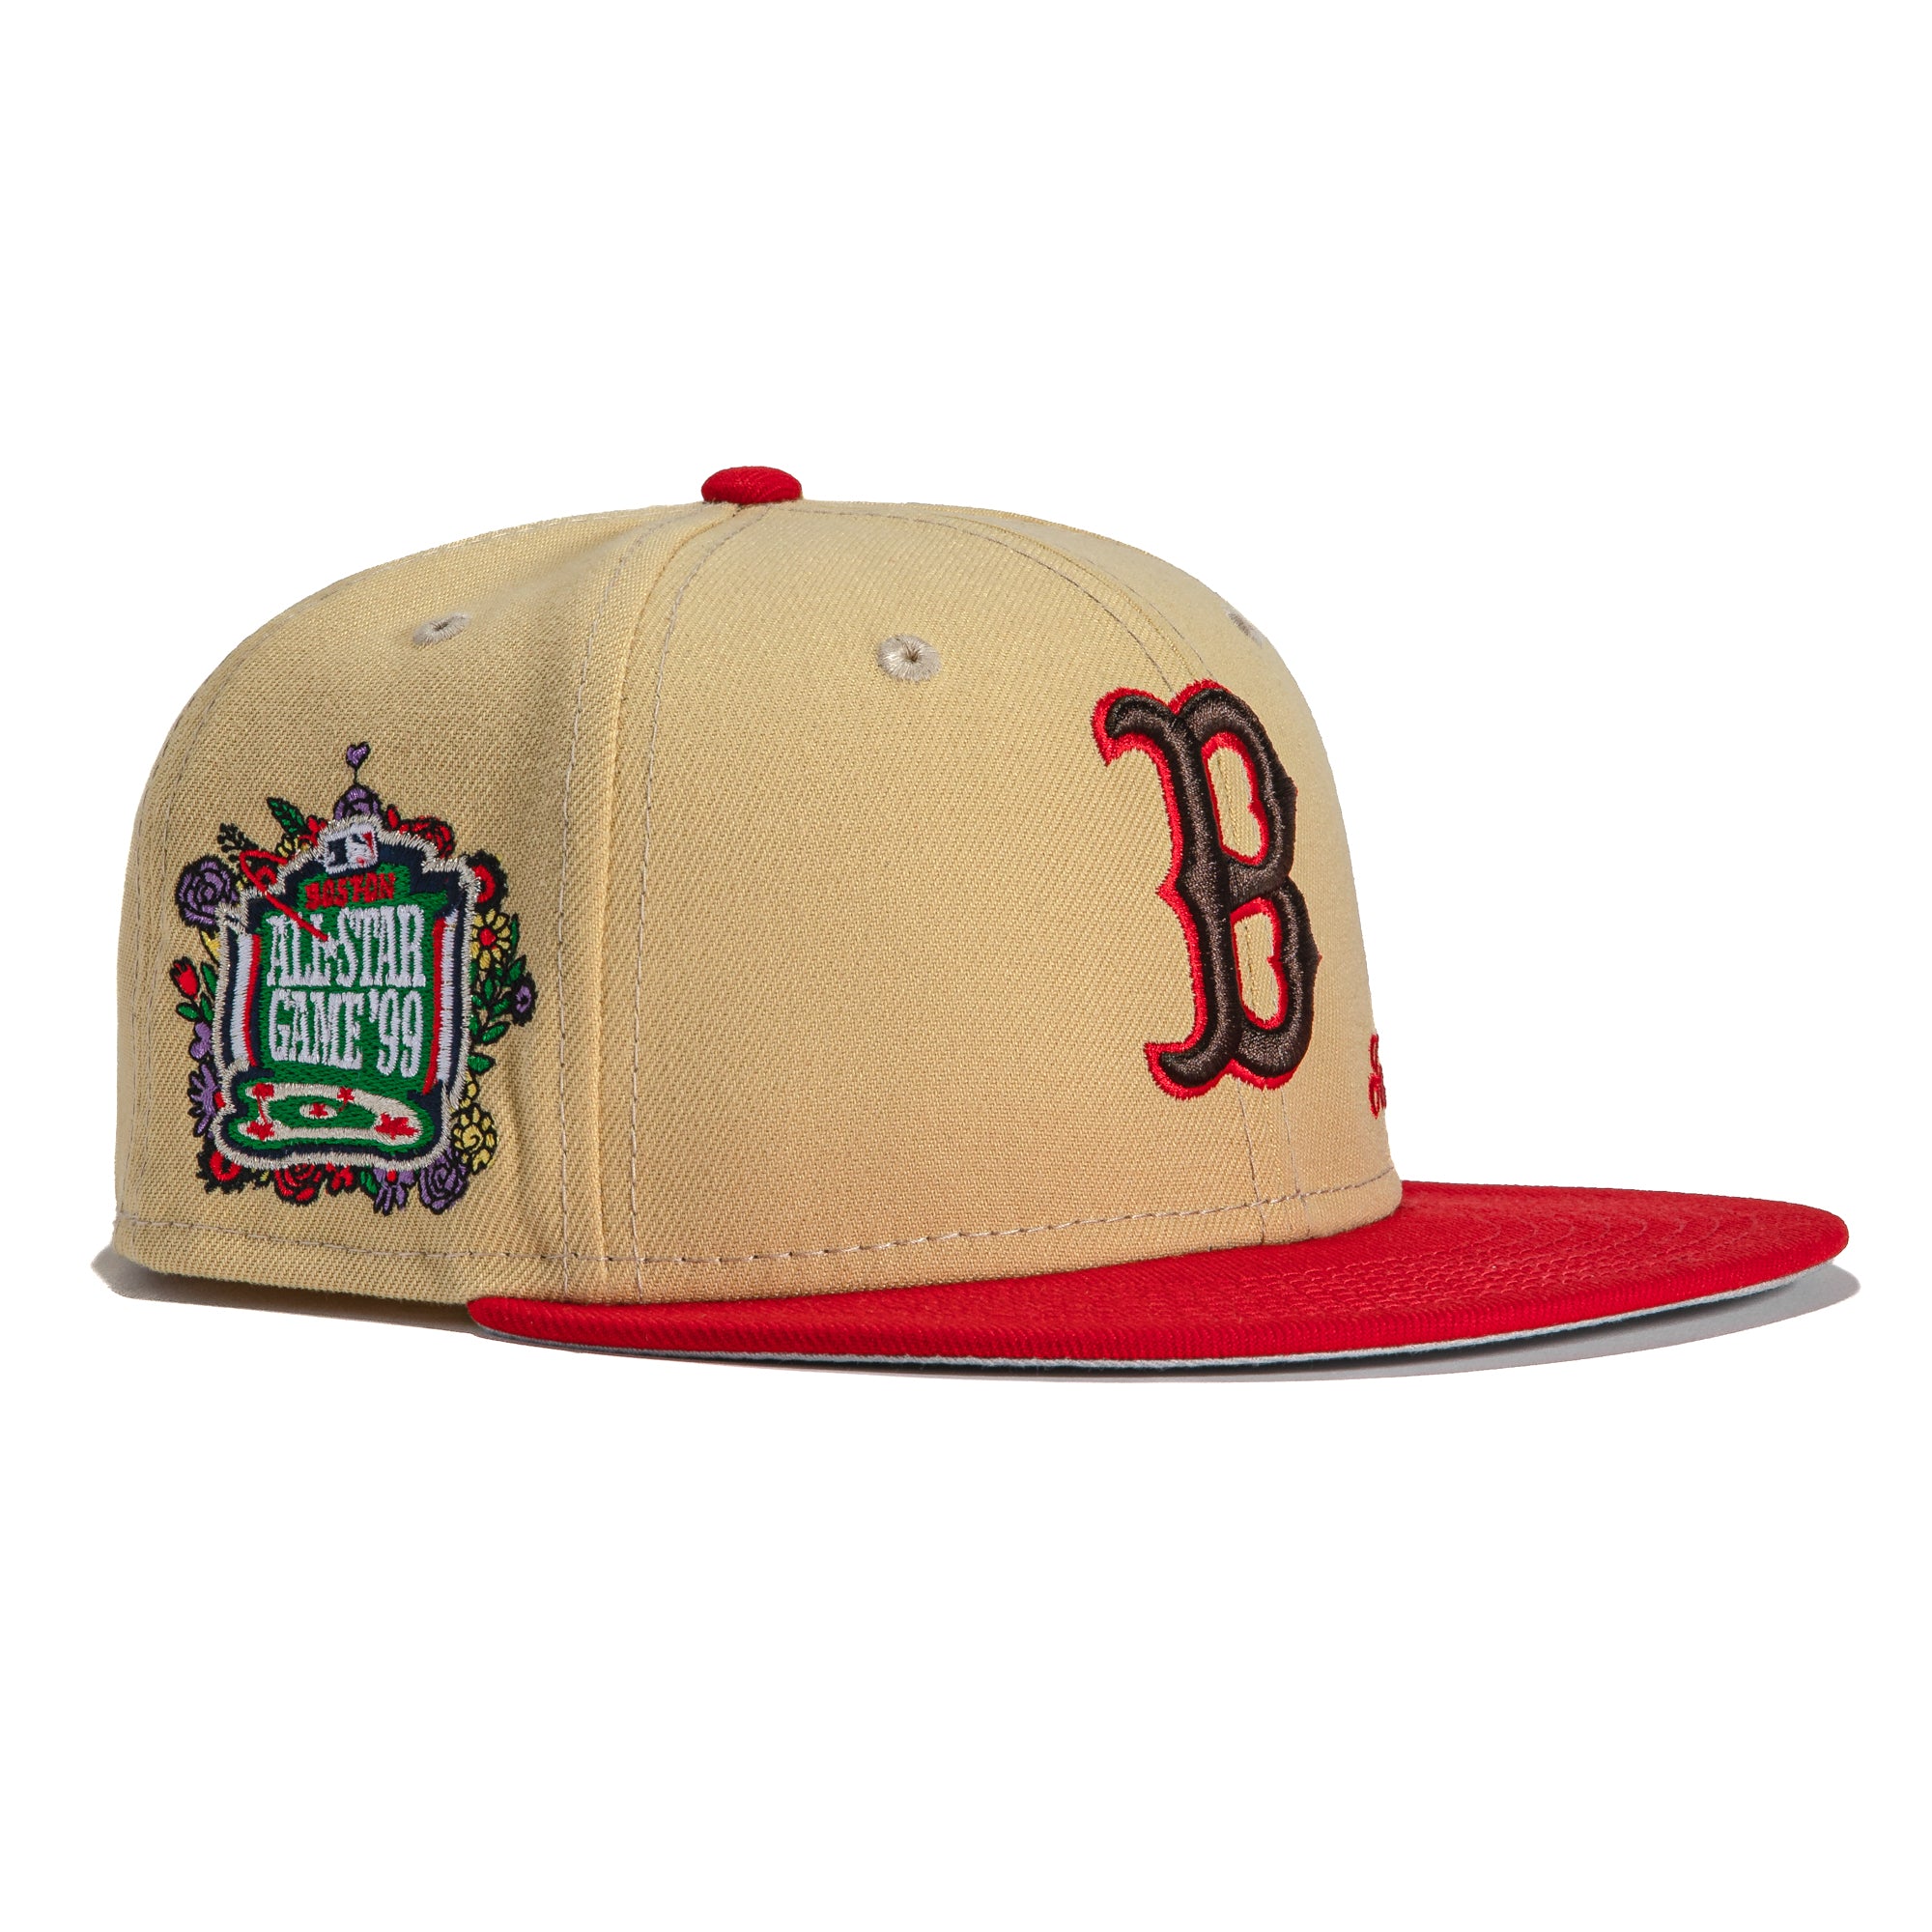 Boston Red Sox New Era 5950 Basic Fitted Hat - Royal/White